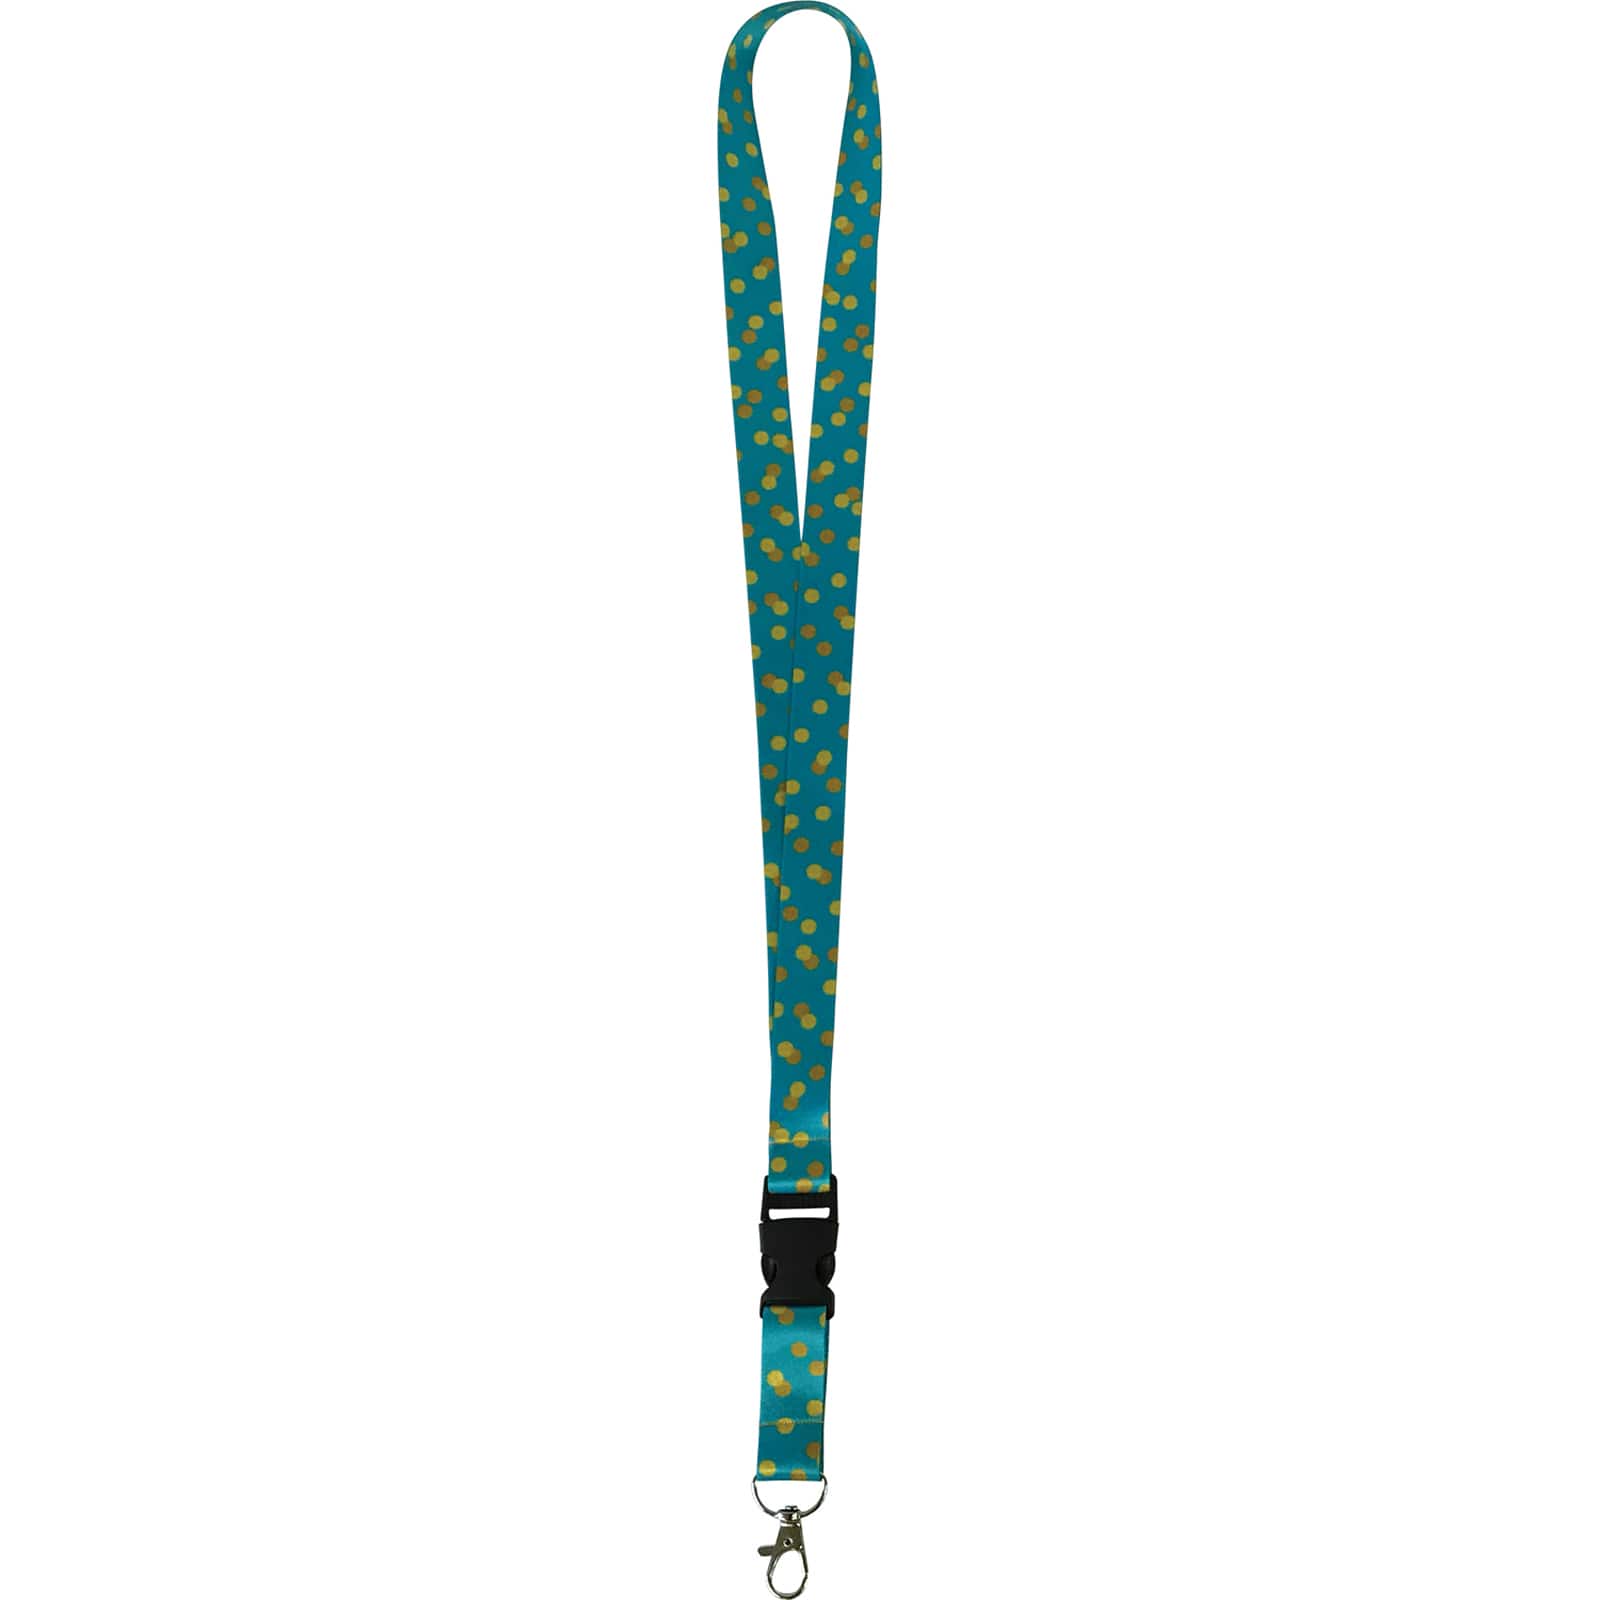 Teacher Created Resources Teal Confetti Lanyard, 6ct.